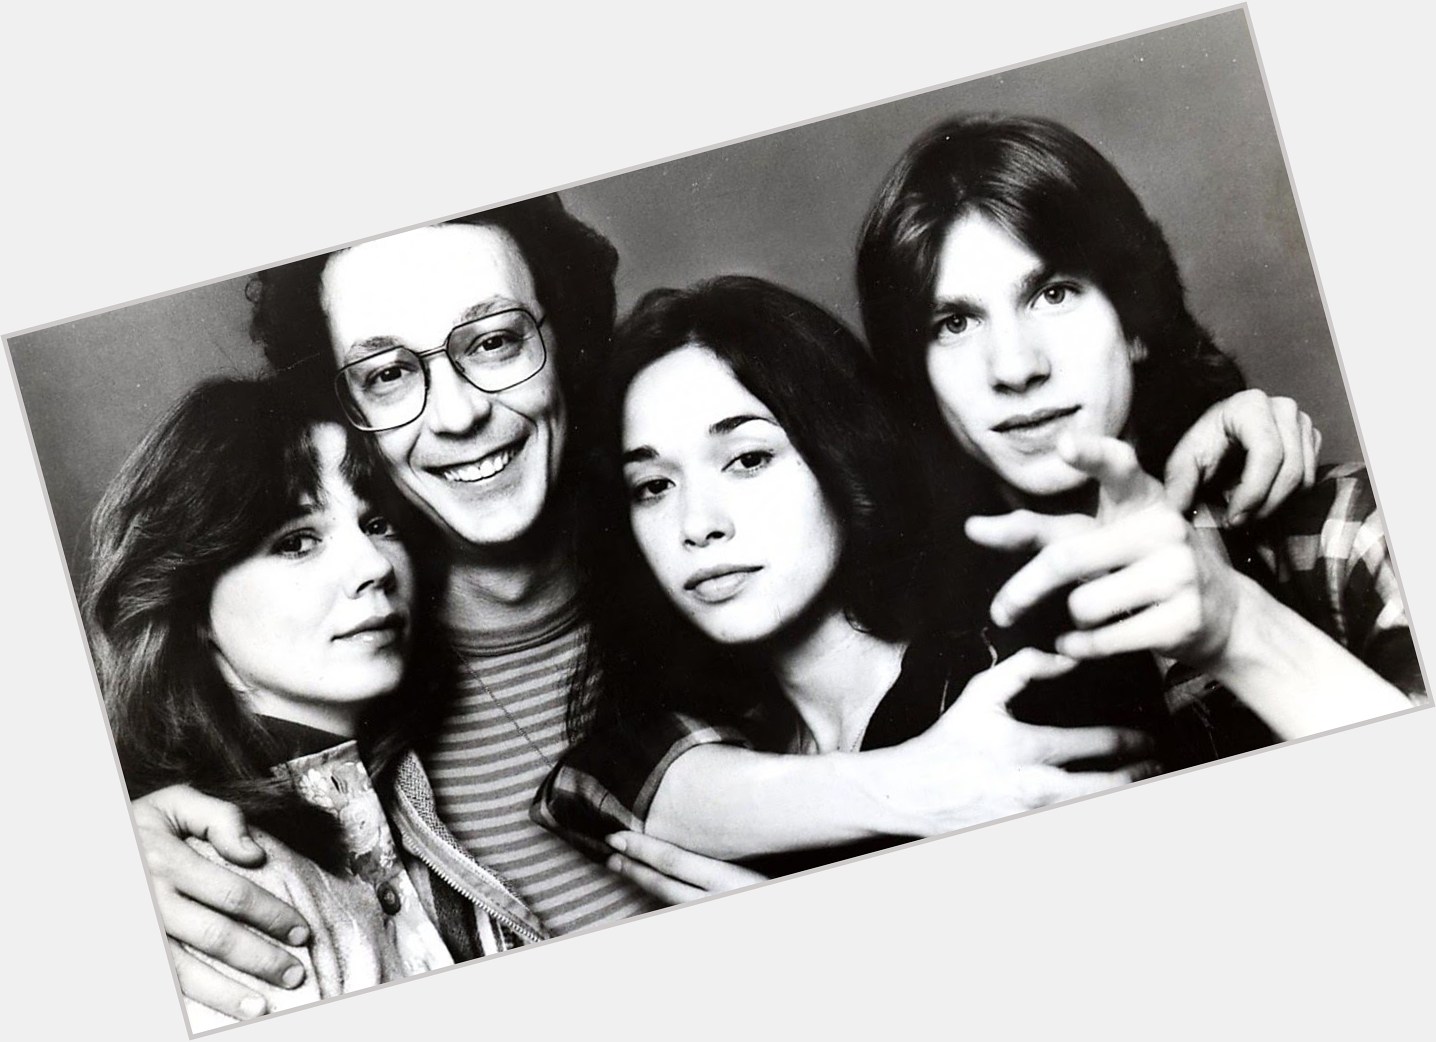 <a href="/hot-men/starland-vocal-band/is-he-where-now">Starland Vocal Band</a>  